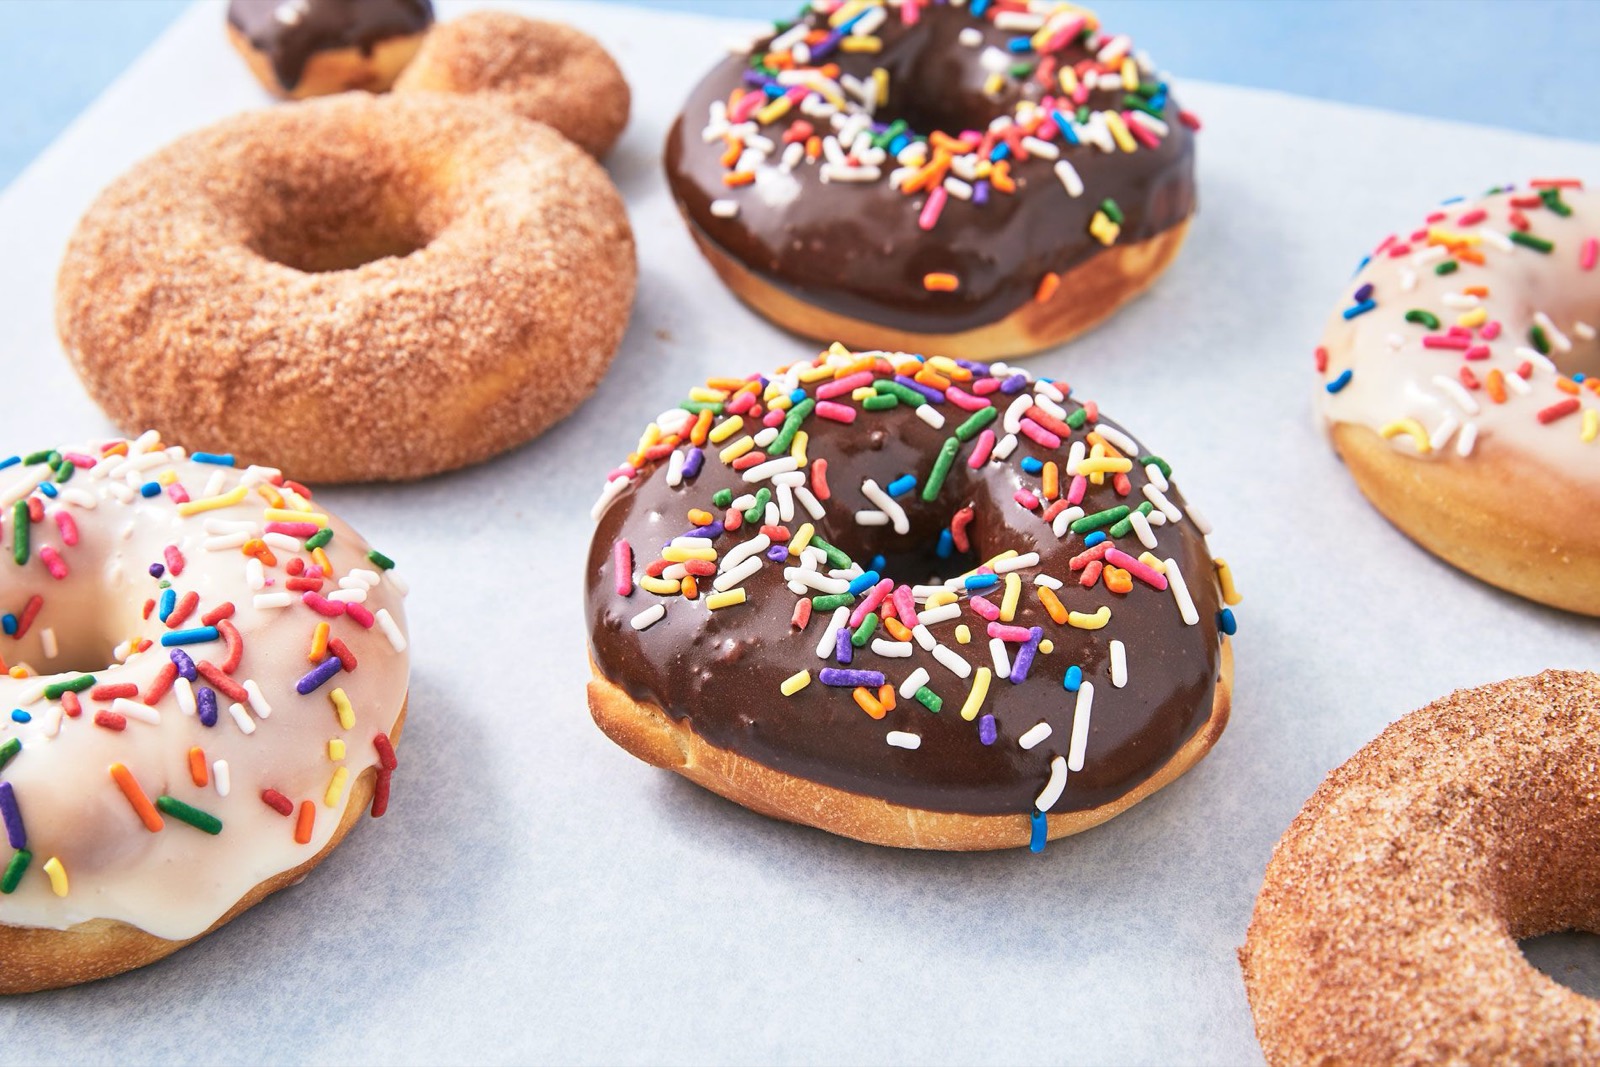 Do You Actually Prefer American or French Desserts? Doughnuts